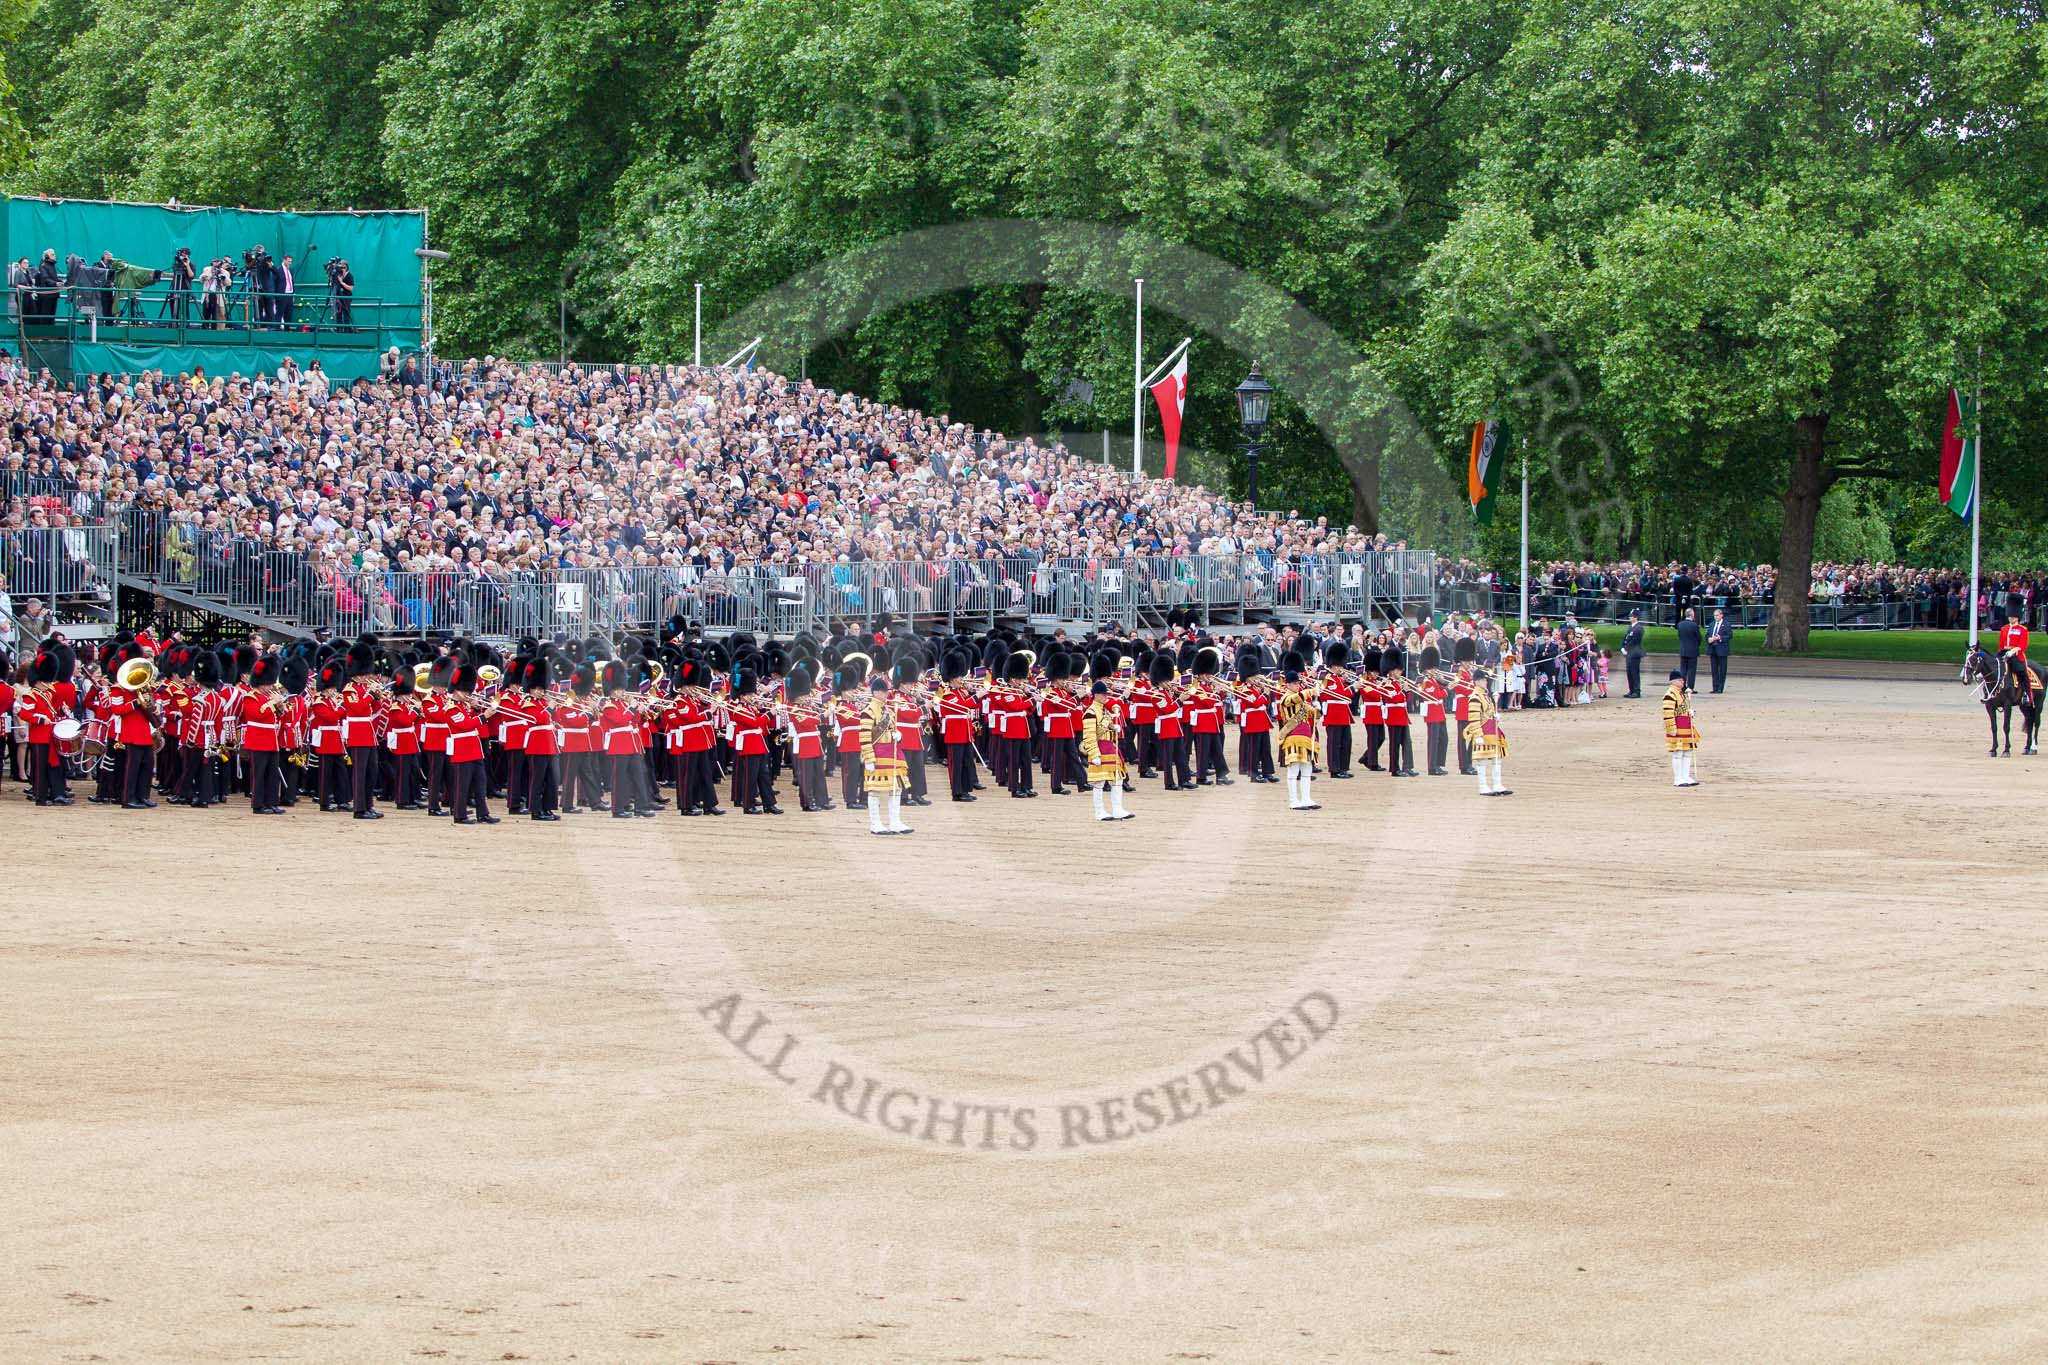 Trooping the Colour 2013: The western side of Horse Guards Parade, with the Massed Bands close to the spectators, and the Major of the Parade on the very right of the image. Image #497, 15 June 2013 11:26 Horse Guards Parade, London, UK